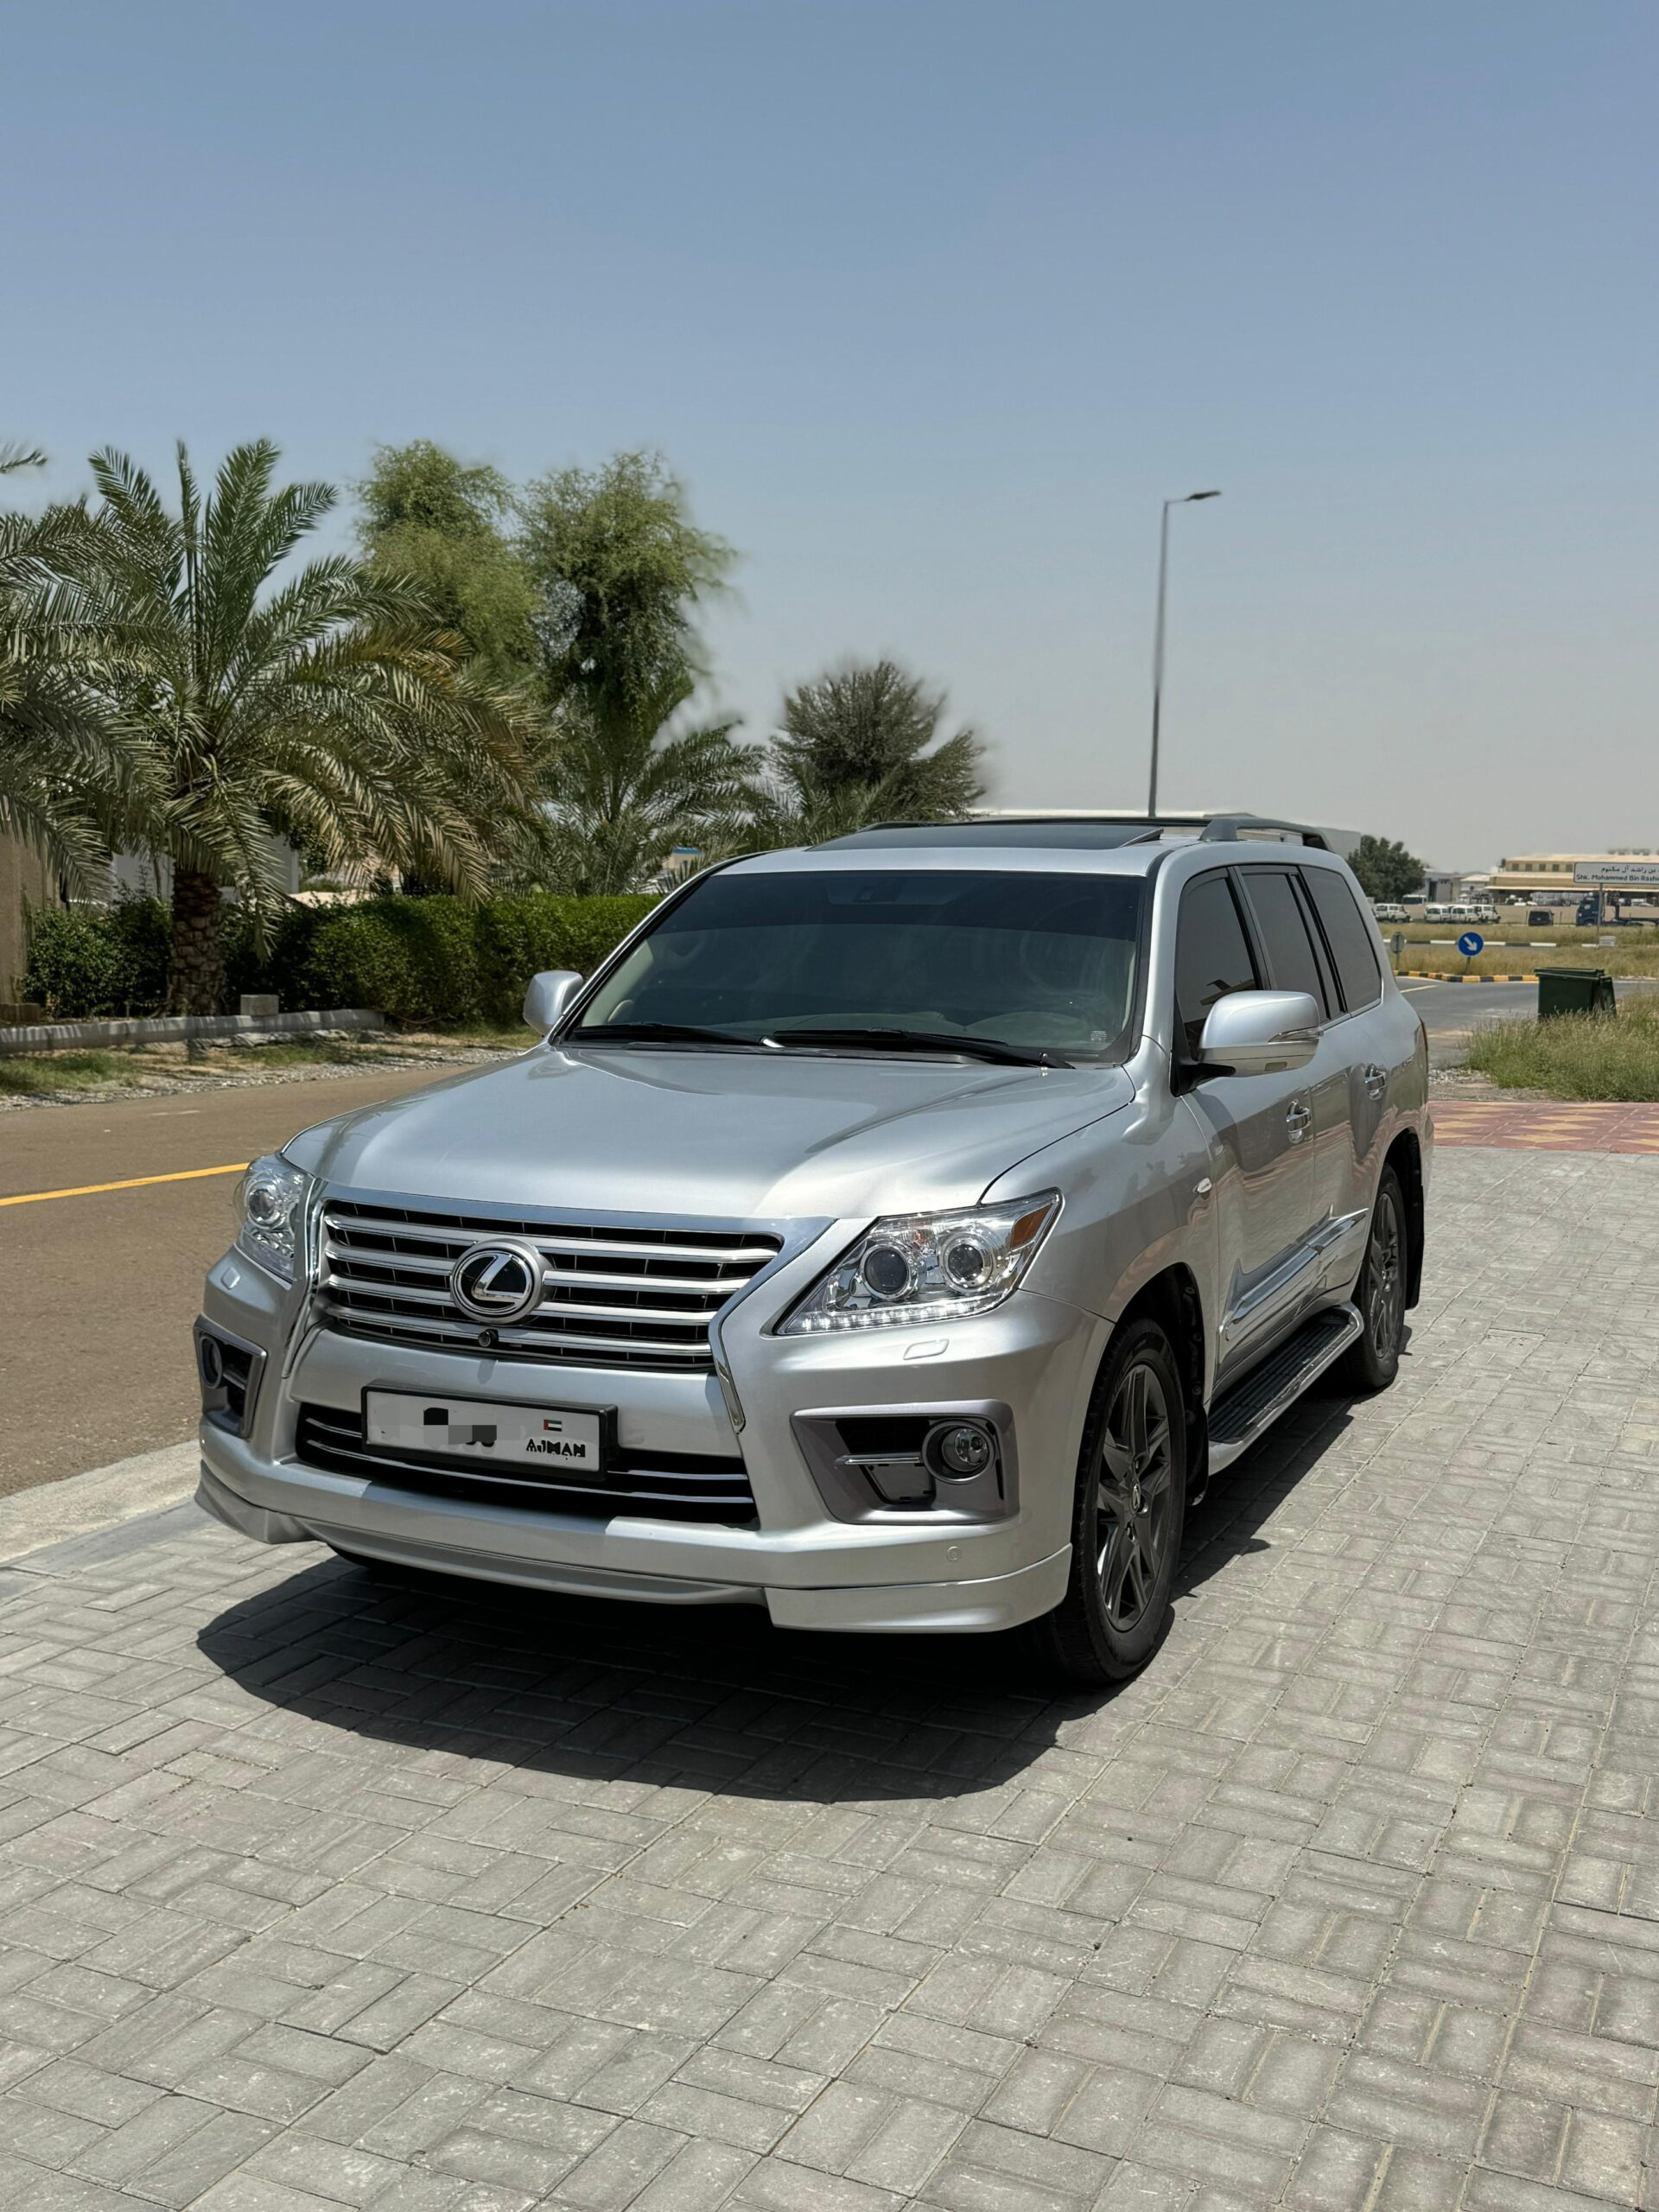 For Sale Lexus LX 570 Gulf Model 2010 converted to 2015